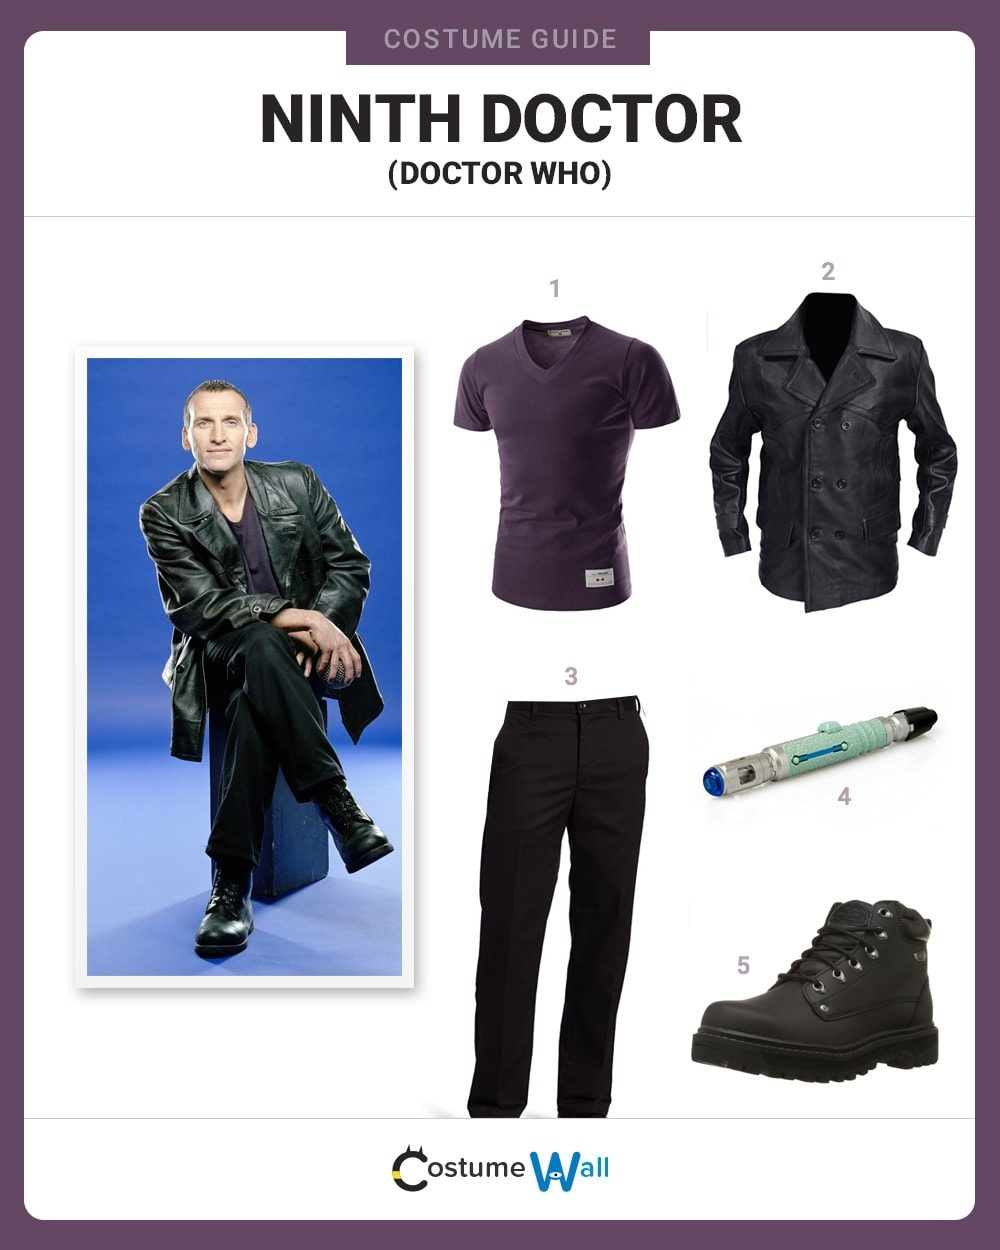 Ninth Doctor Costume Guide